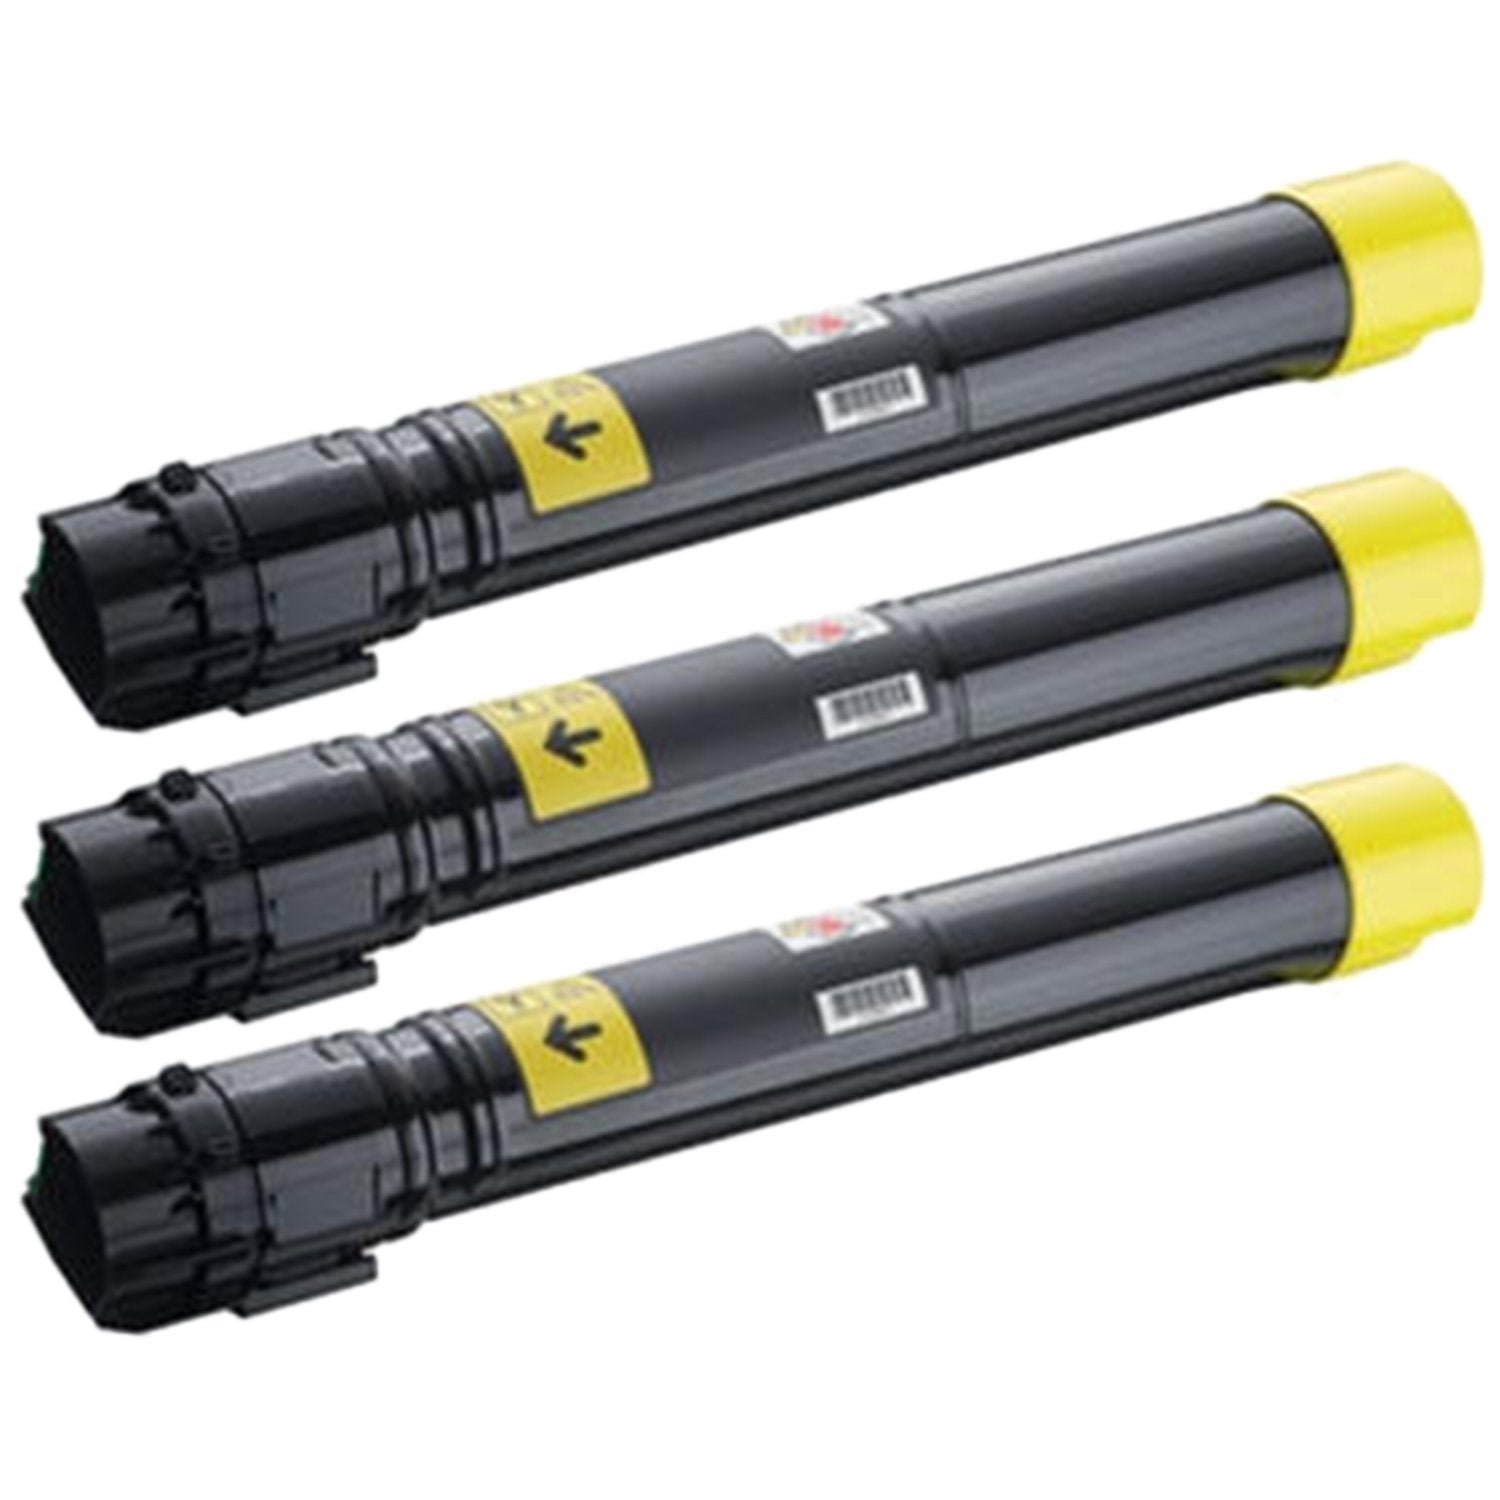 Absolute Toner Compatible Xerox 106R01568 Yellow High Yield Toner Cartridge | Absolute Toner Xerox Toner Cartridges